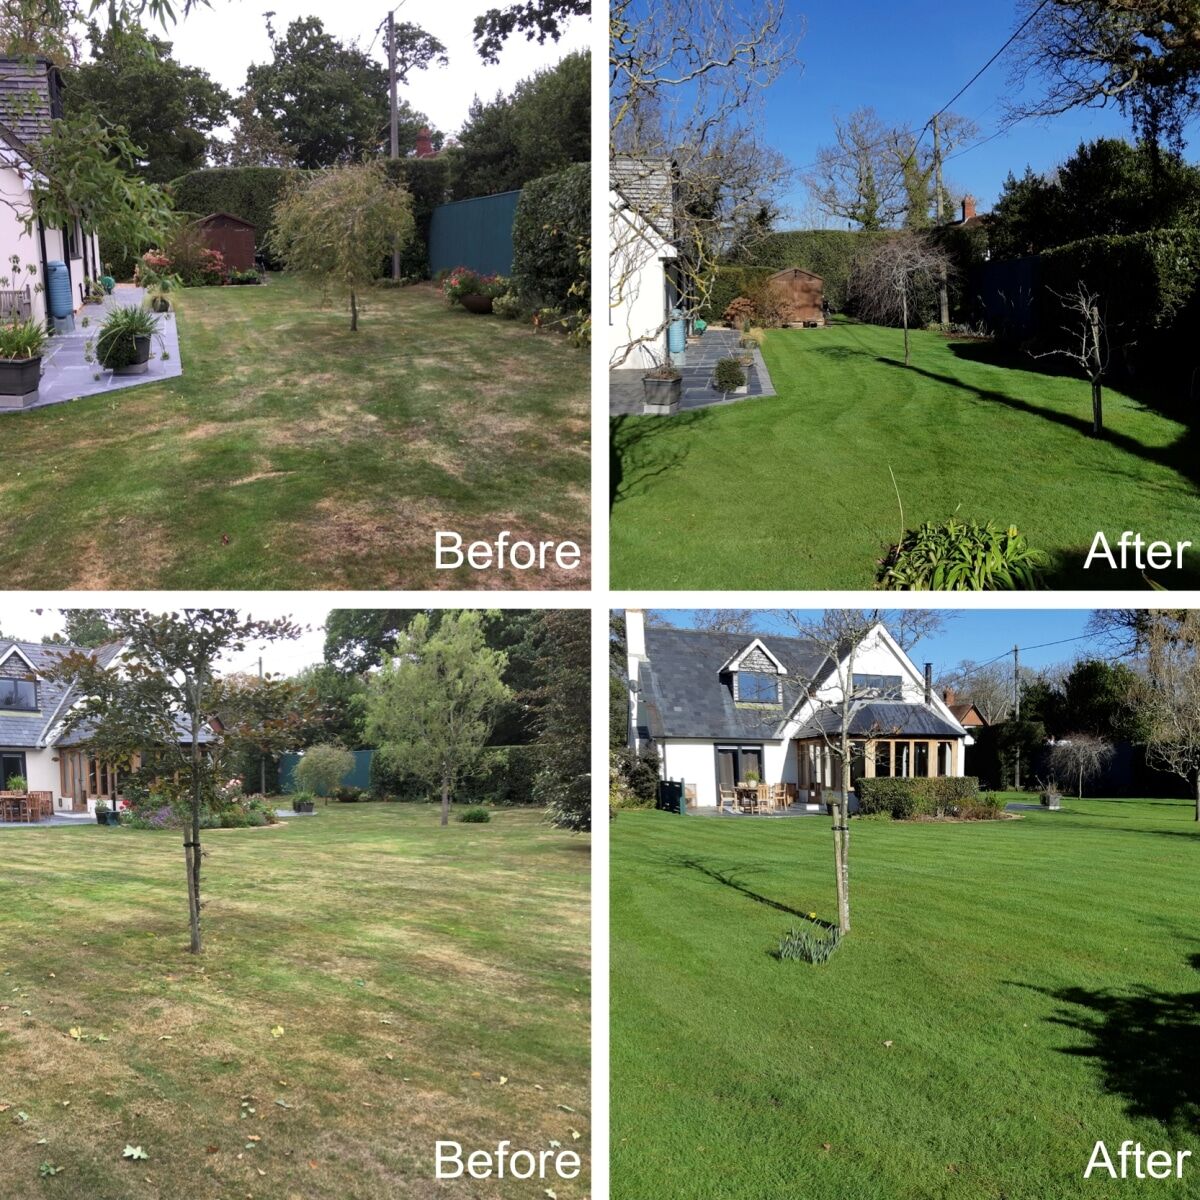 Images of damaged lawns and healthy lawns